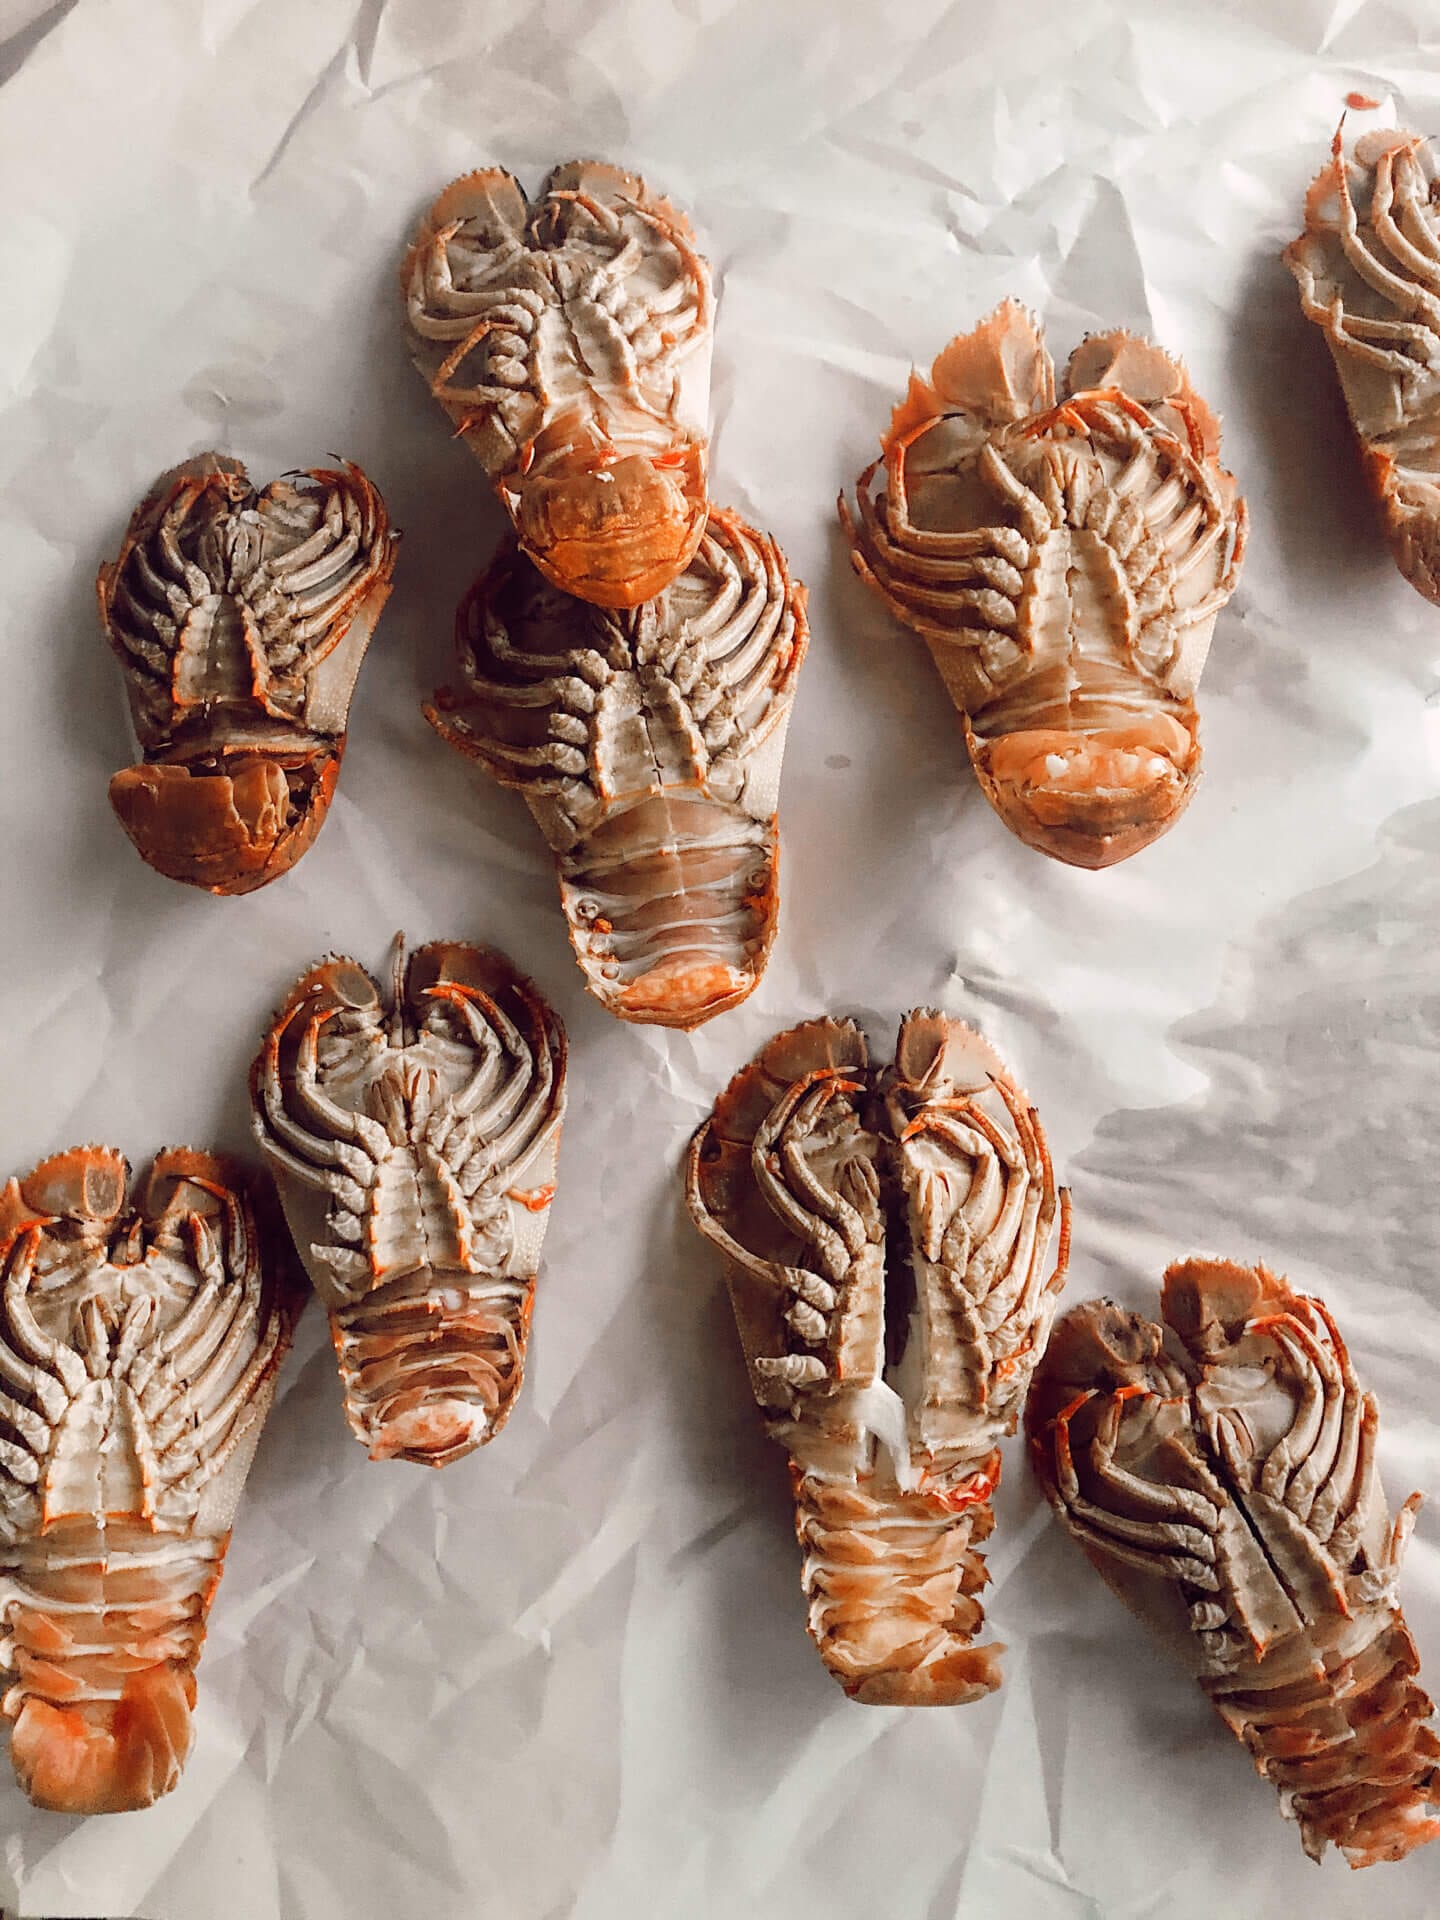 Several Morton Bay Bugs from Rufus King Seafood Shop